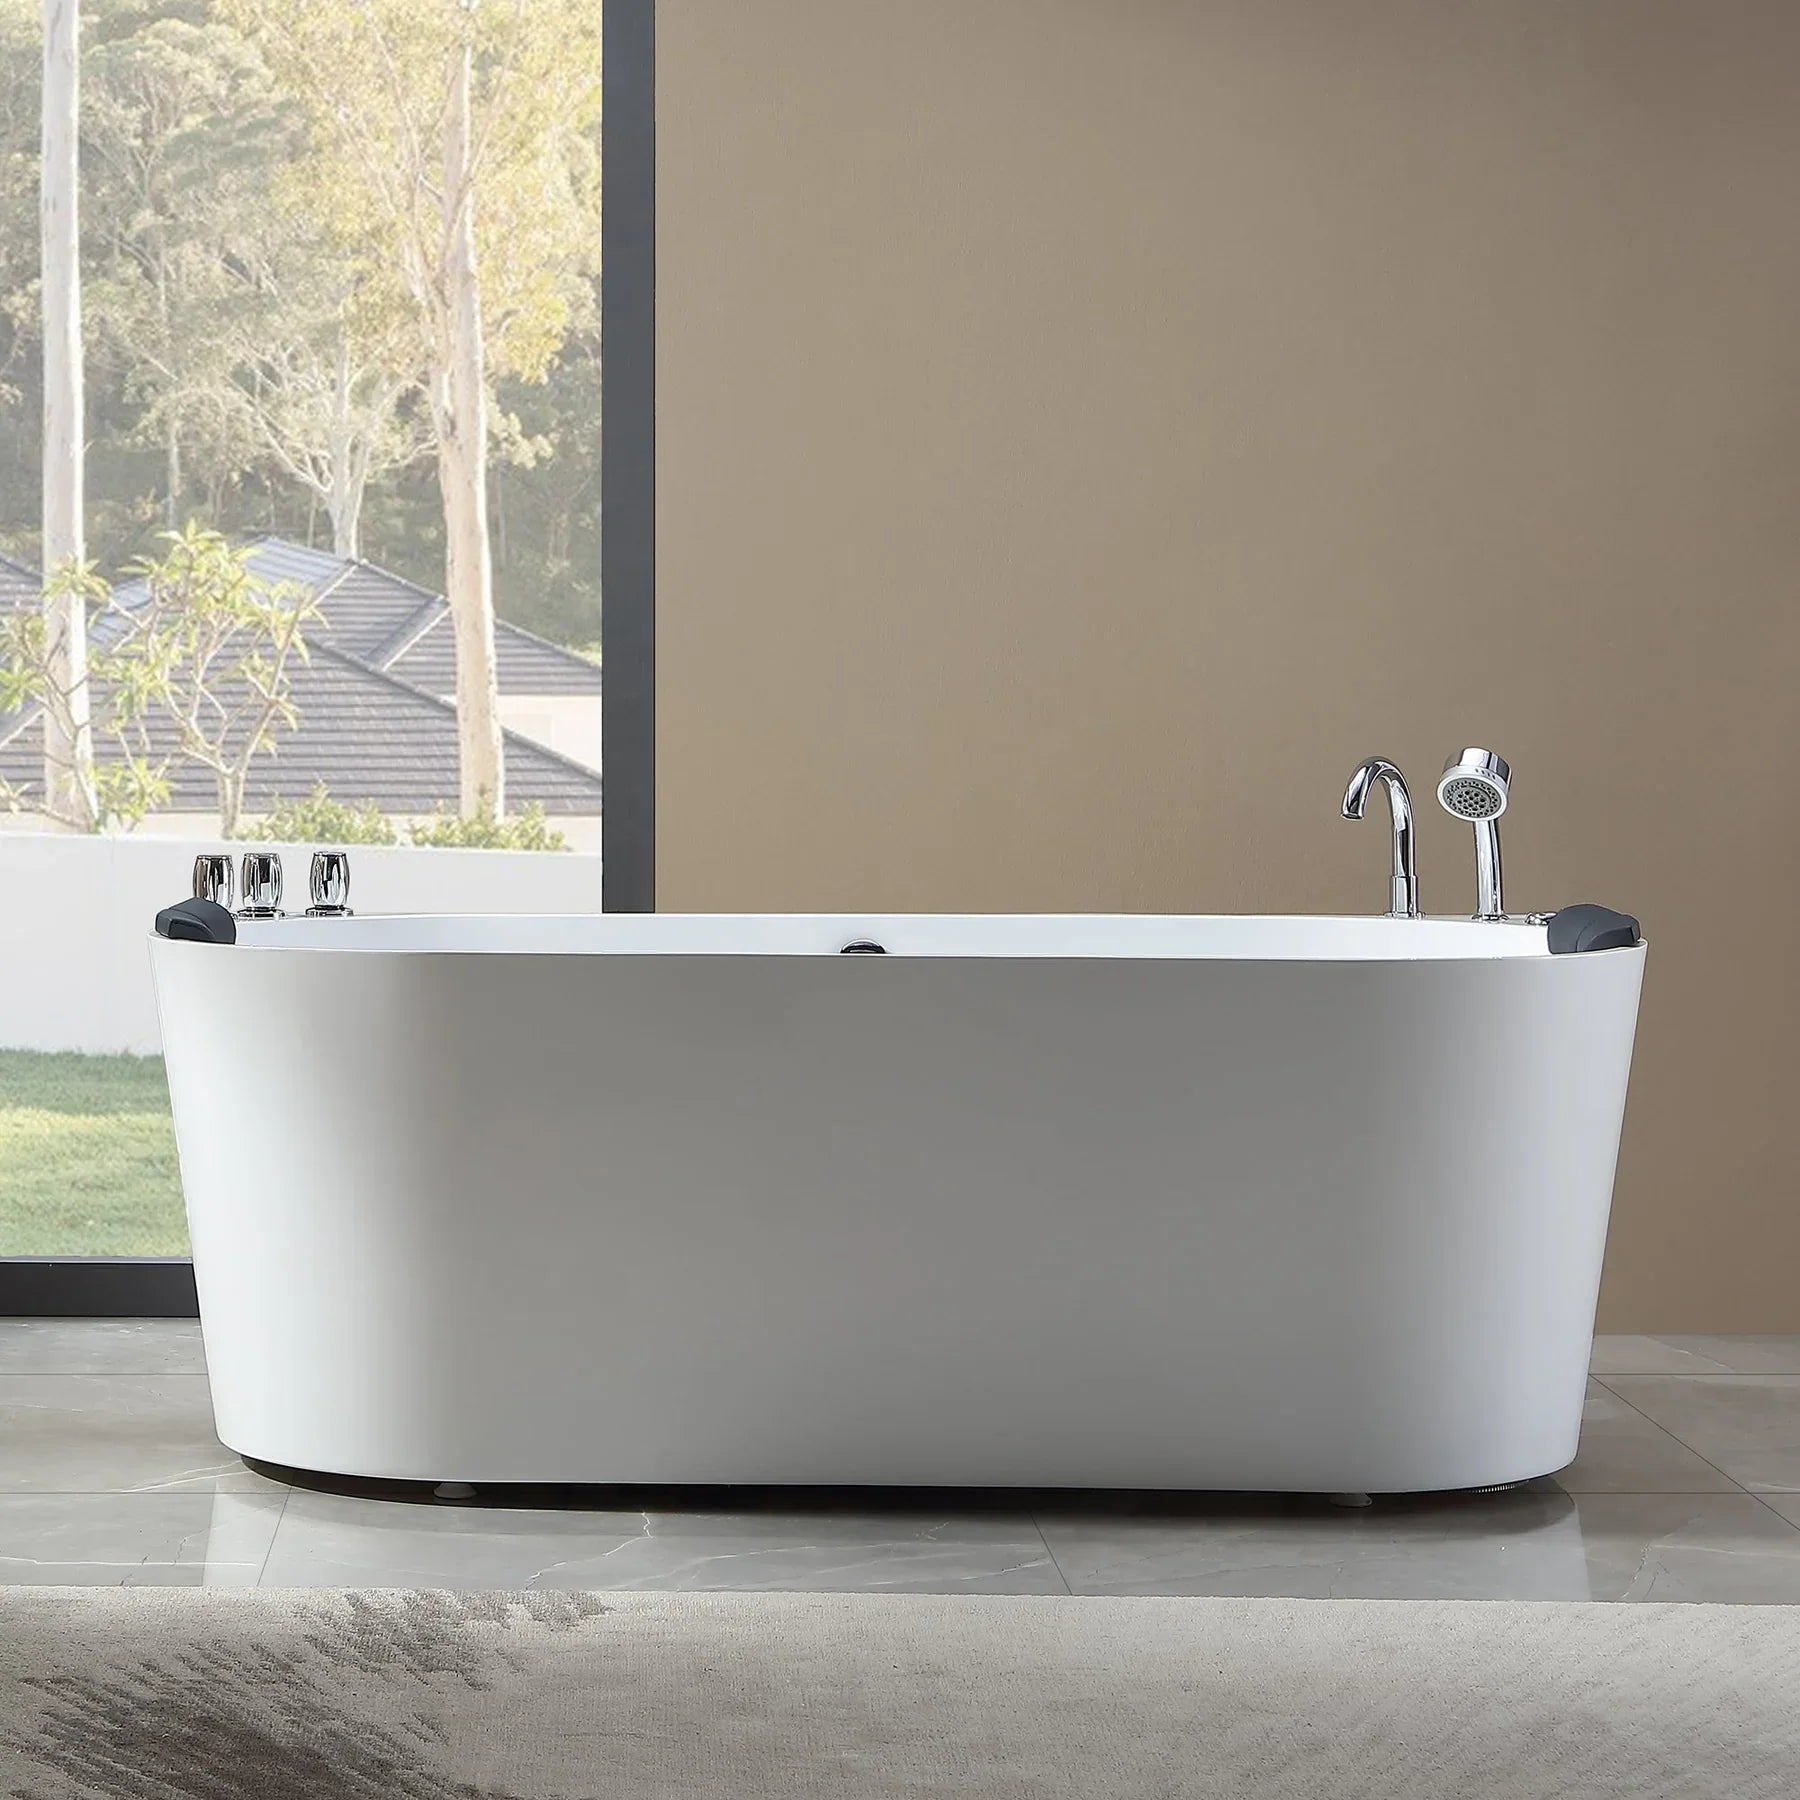 Empava 71 in. Luxurious Oval Jetted Bathtub in White Acrylic (71AIS08)